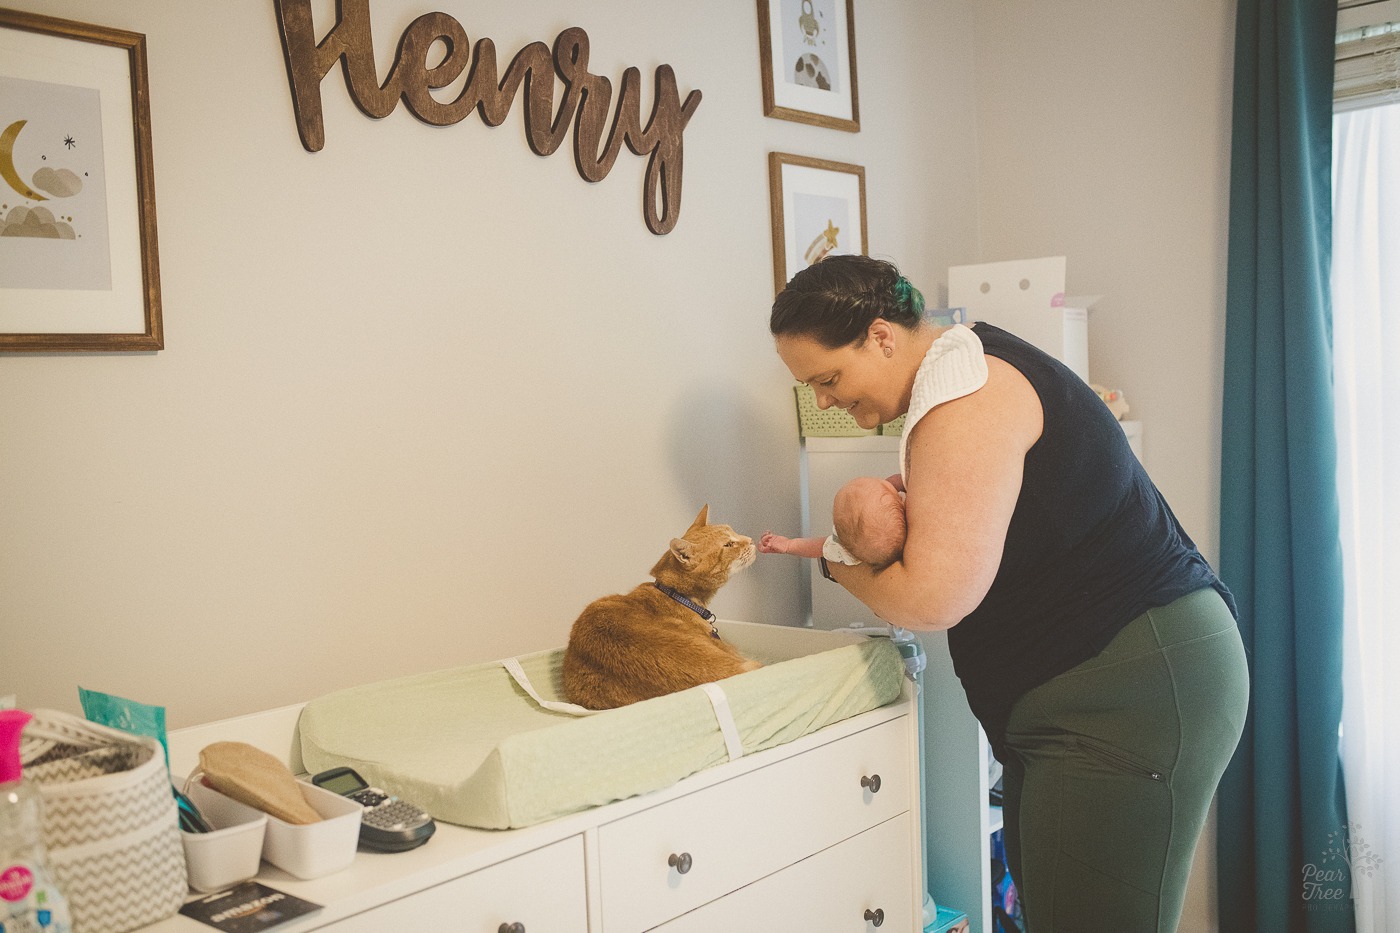 Mom talking to the orange tabby cat on her newborn son's changing pad